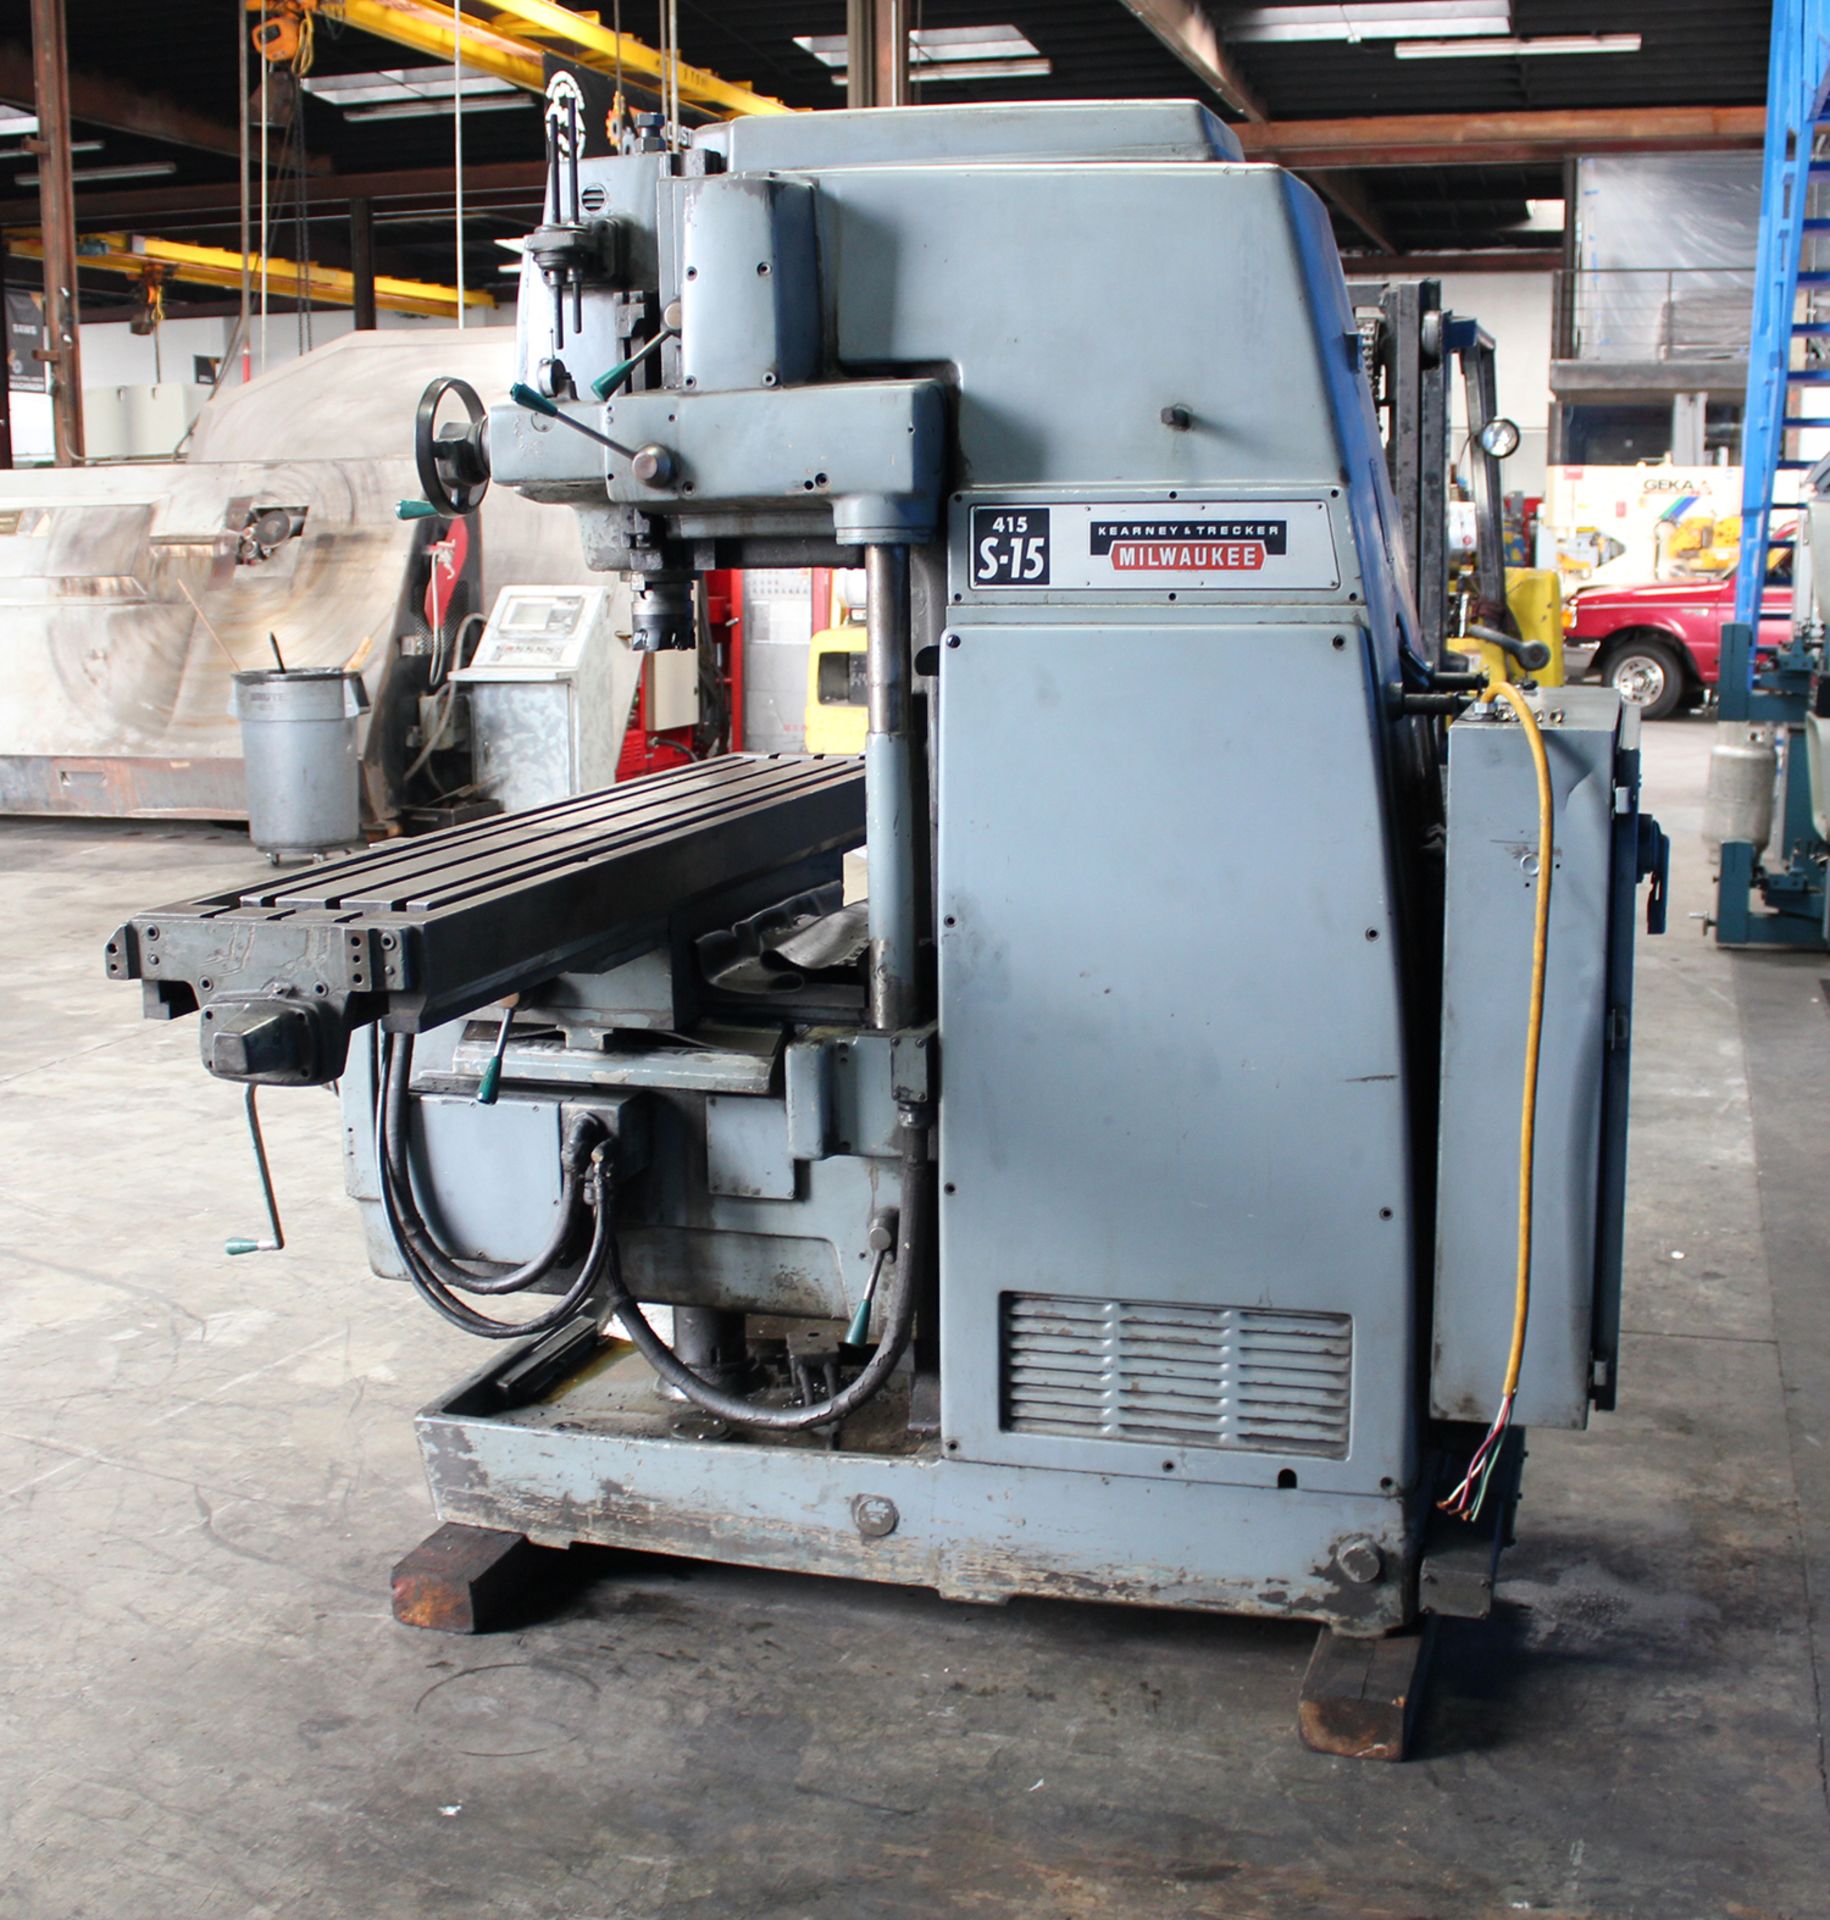 15" x 76" Table Kearney Trecker K&T 415 S-15 Vertical Milling Machine - Located In: Huntington Park, - Image 4 of 8